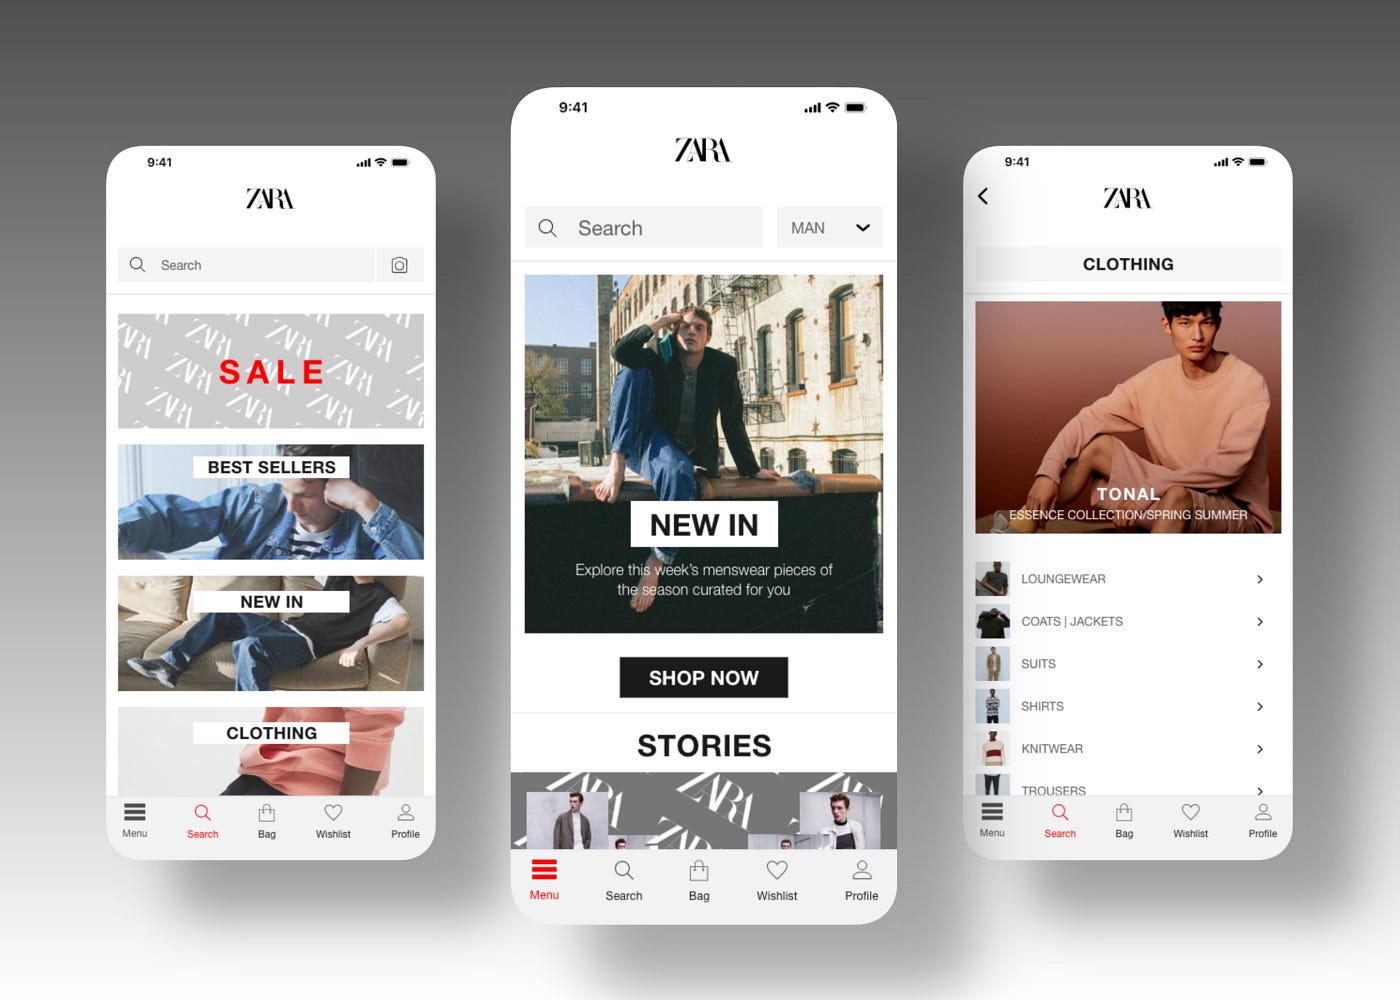 Zara — UX Case Study. Mobile shopping is becoming more… | by Sam Samvura |  Medium